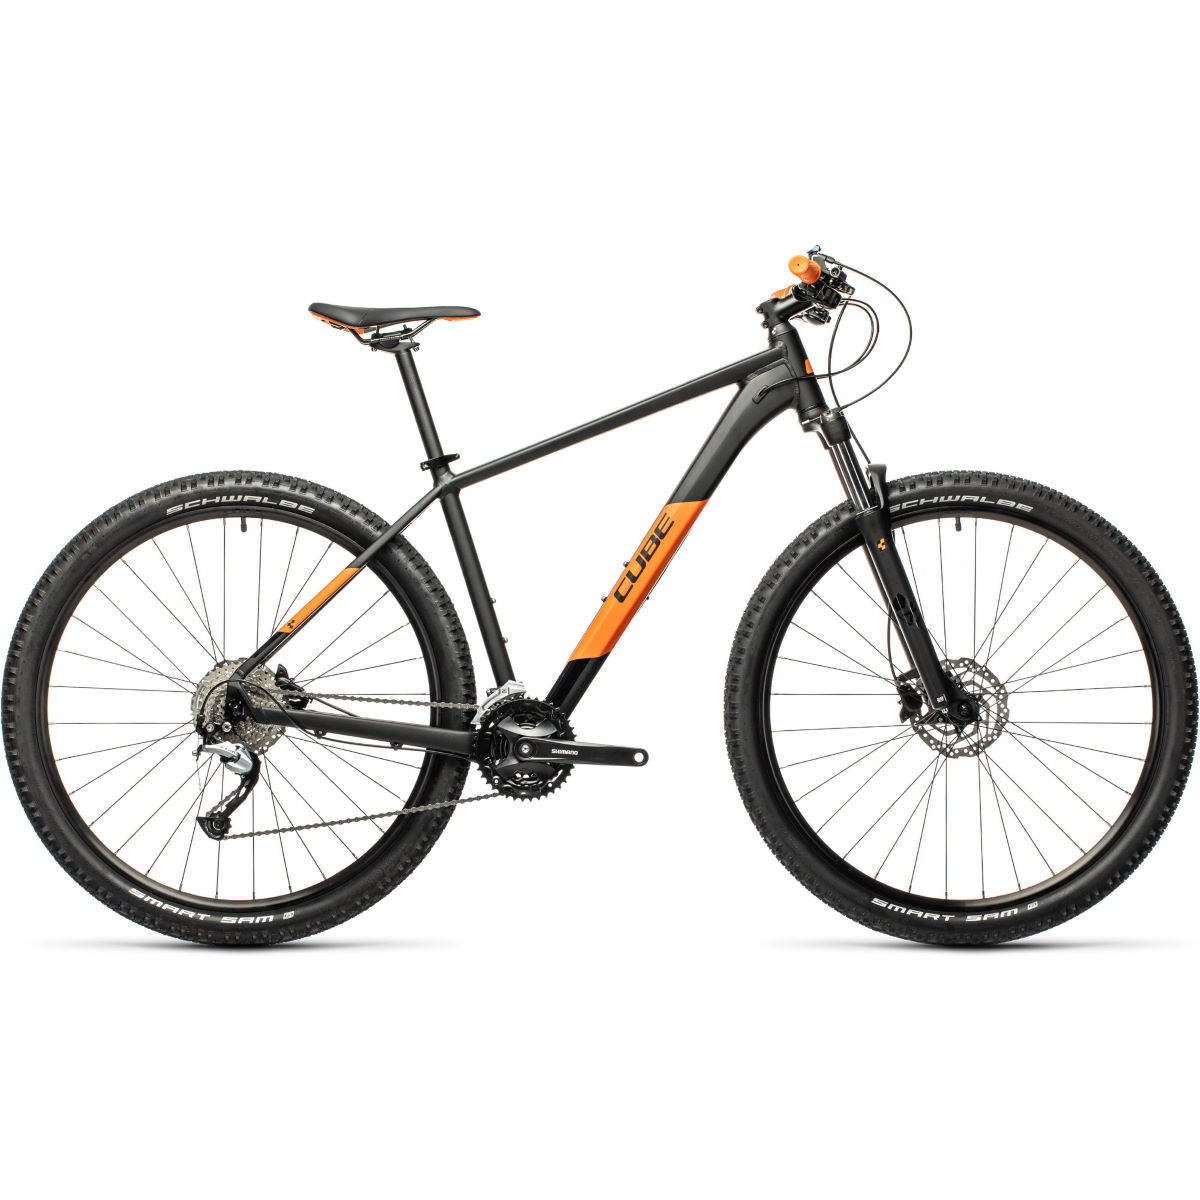 salon herberg Offer Cube Aim hardtail mountain bikes: Read our honest review